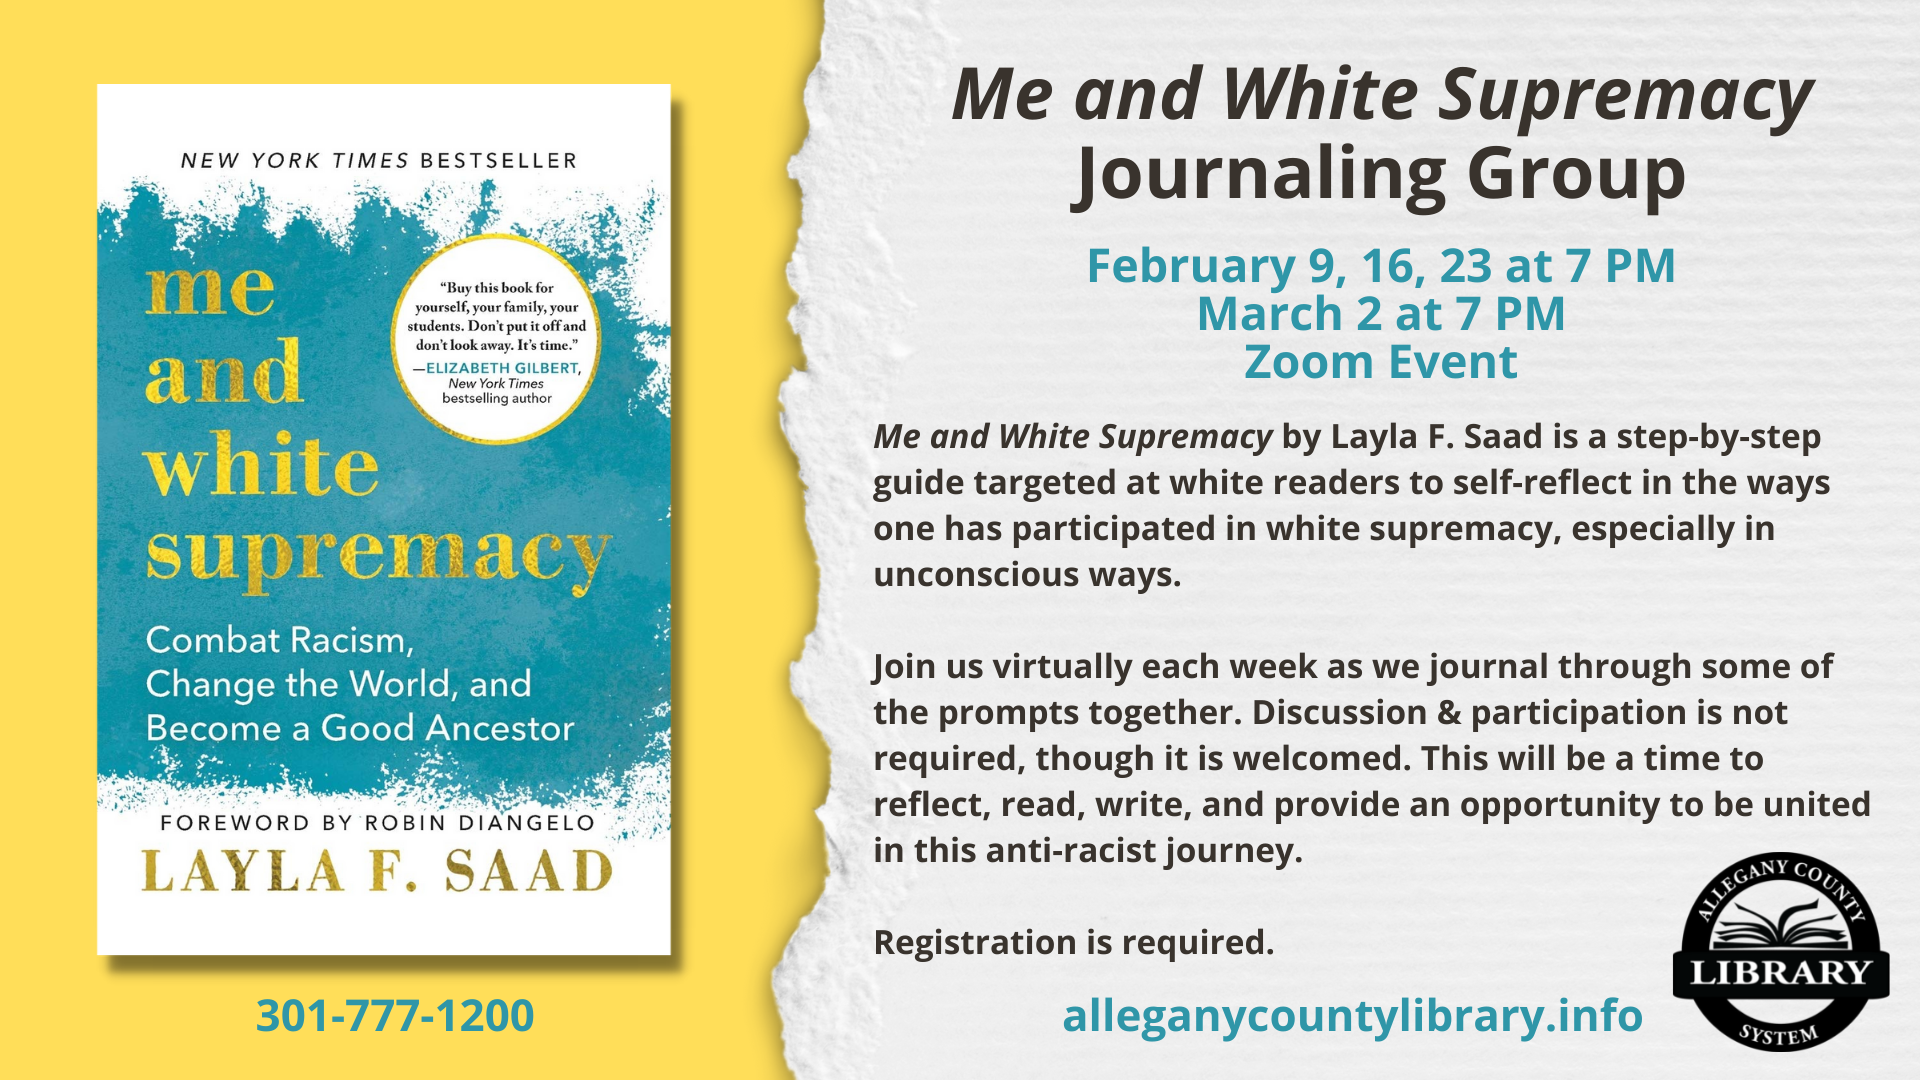 Book cover of Me and White Supremacy beside event details